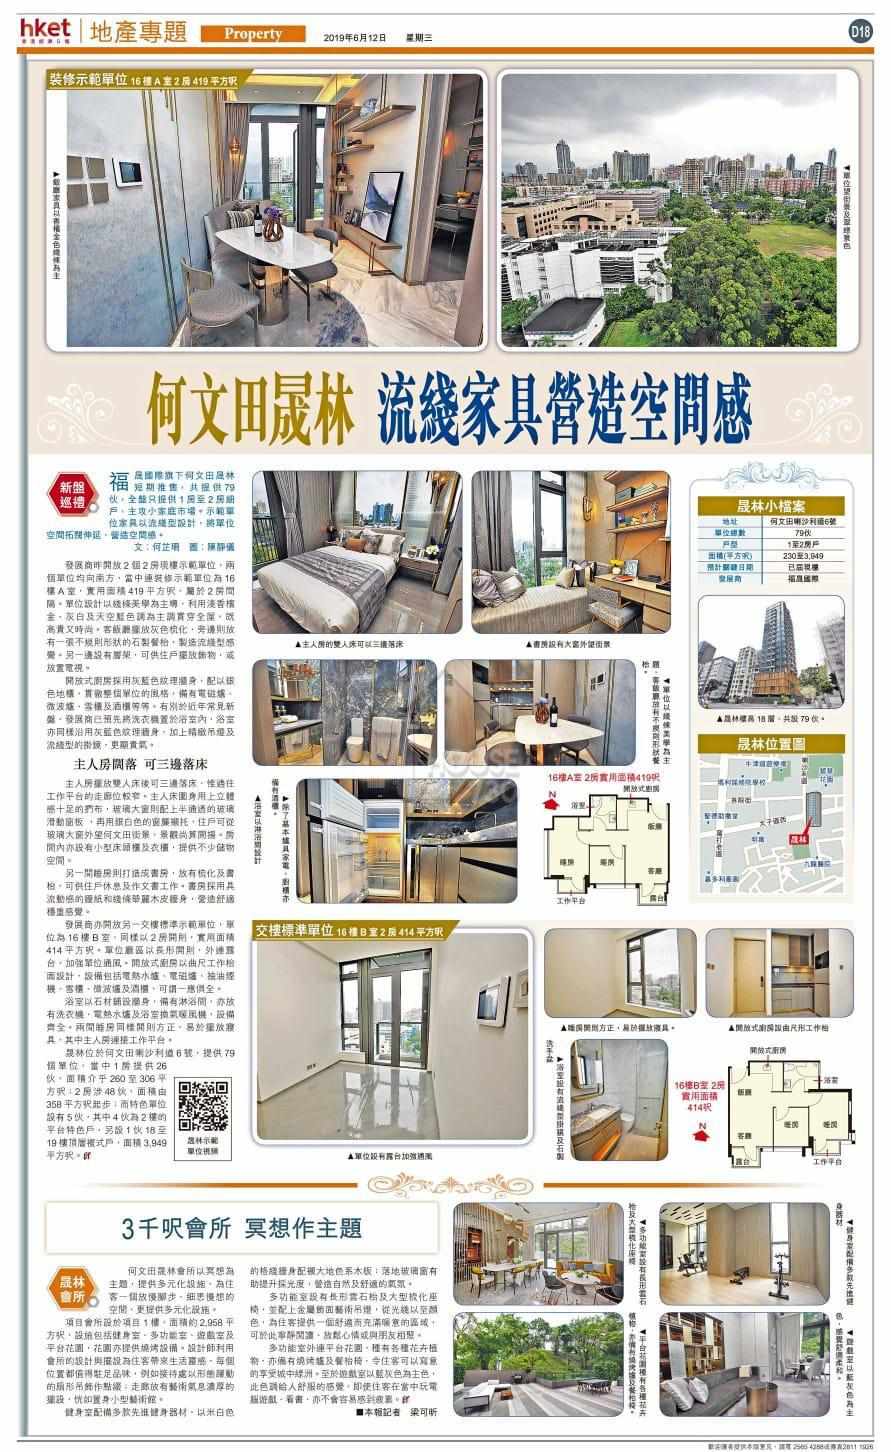 Kowloon Tong LA SALLE RESIDENCE Middle Floor House730-4475235